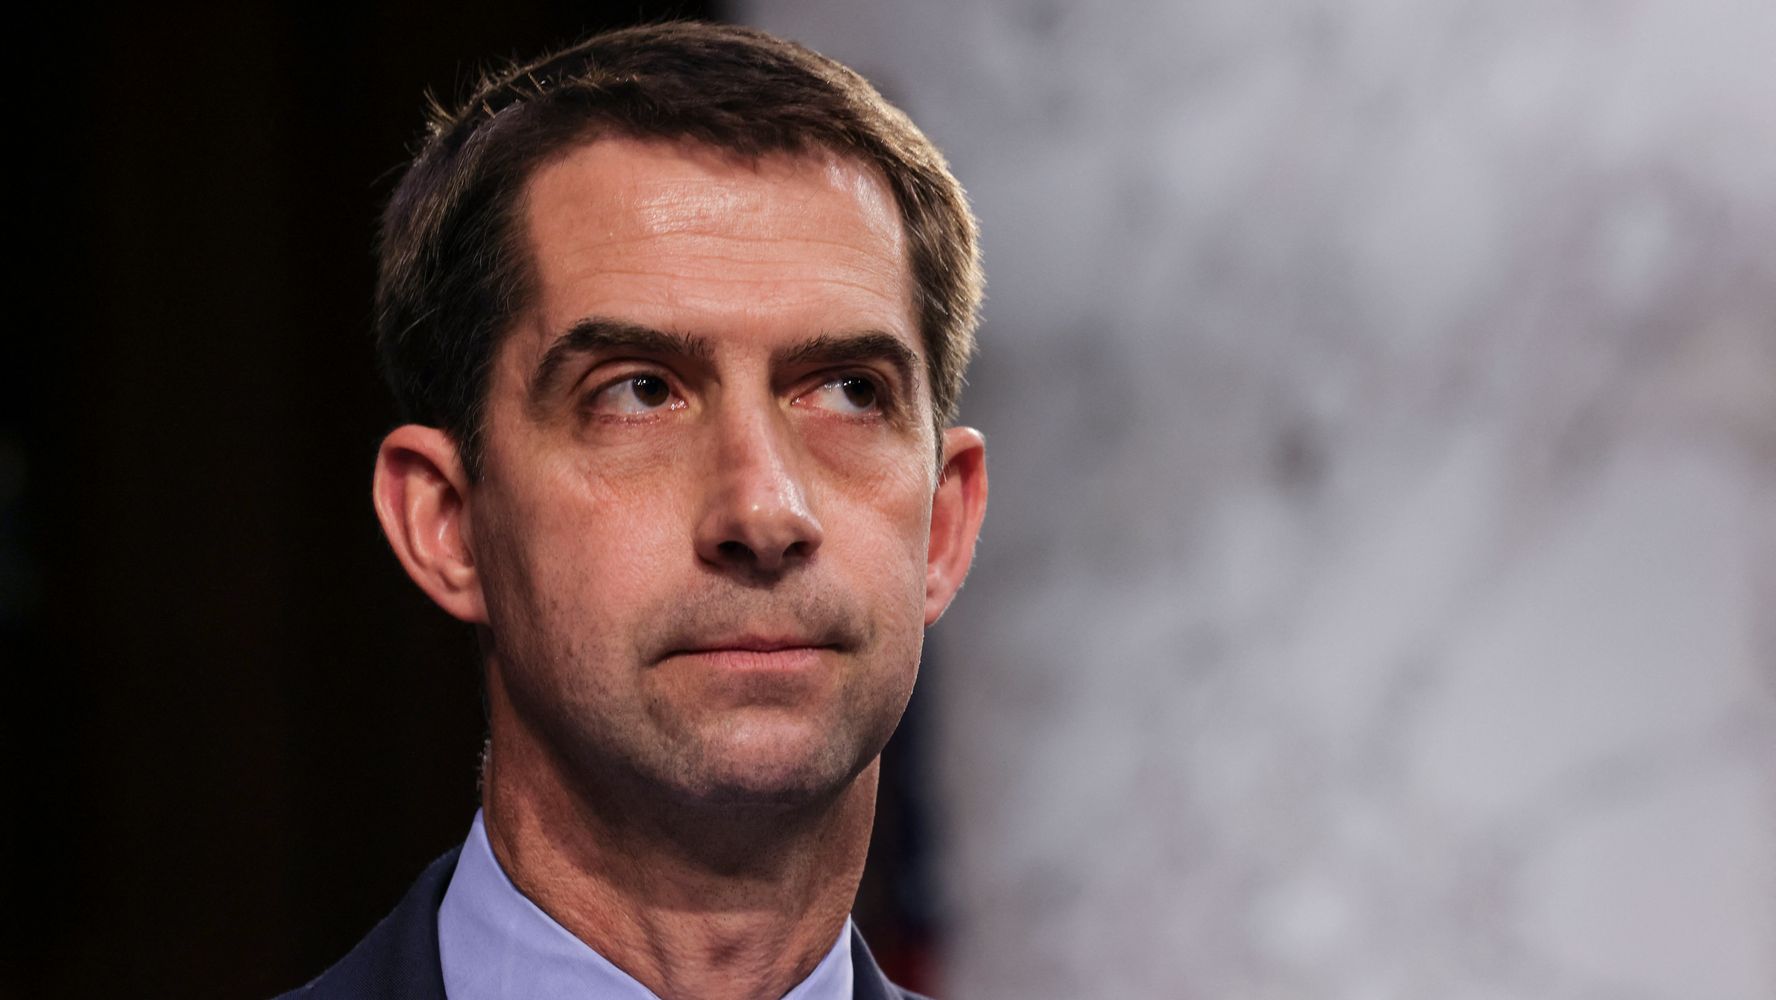 Sen. Tom Cotton Comes Up With Novel Way To Hail Whiteness, Gets Harsh Smackdown